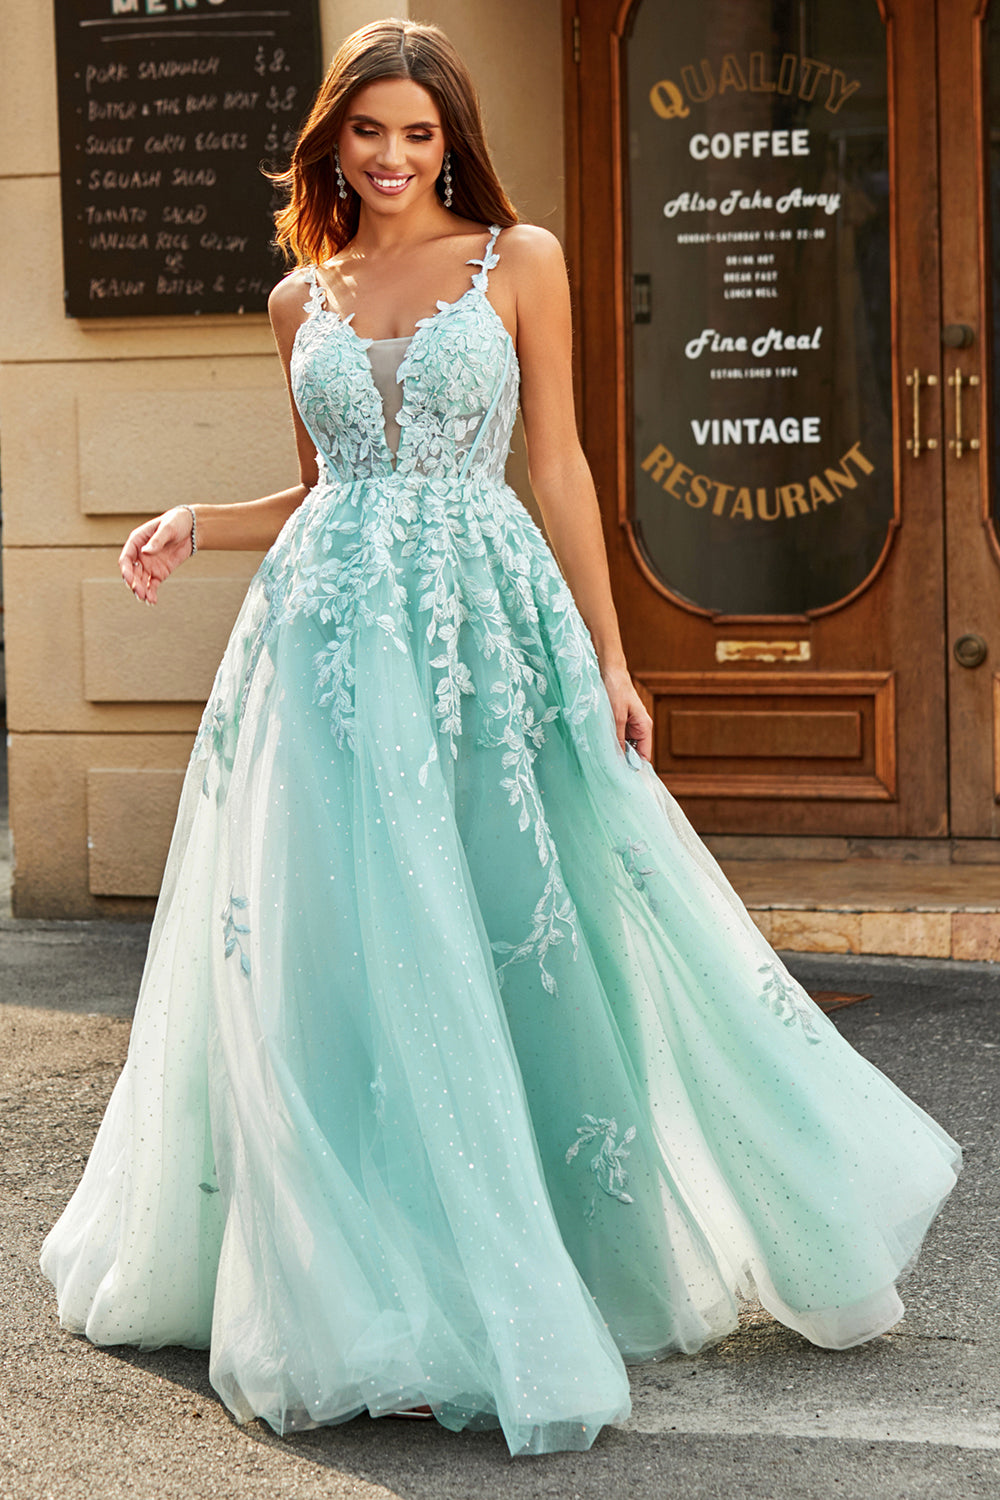 Mint Ball-Gown Glitter Beaded Tulle Long Prom Dress With Lace Leaf Appliques